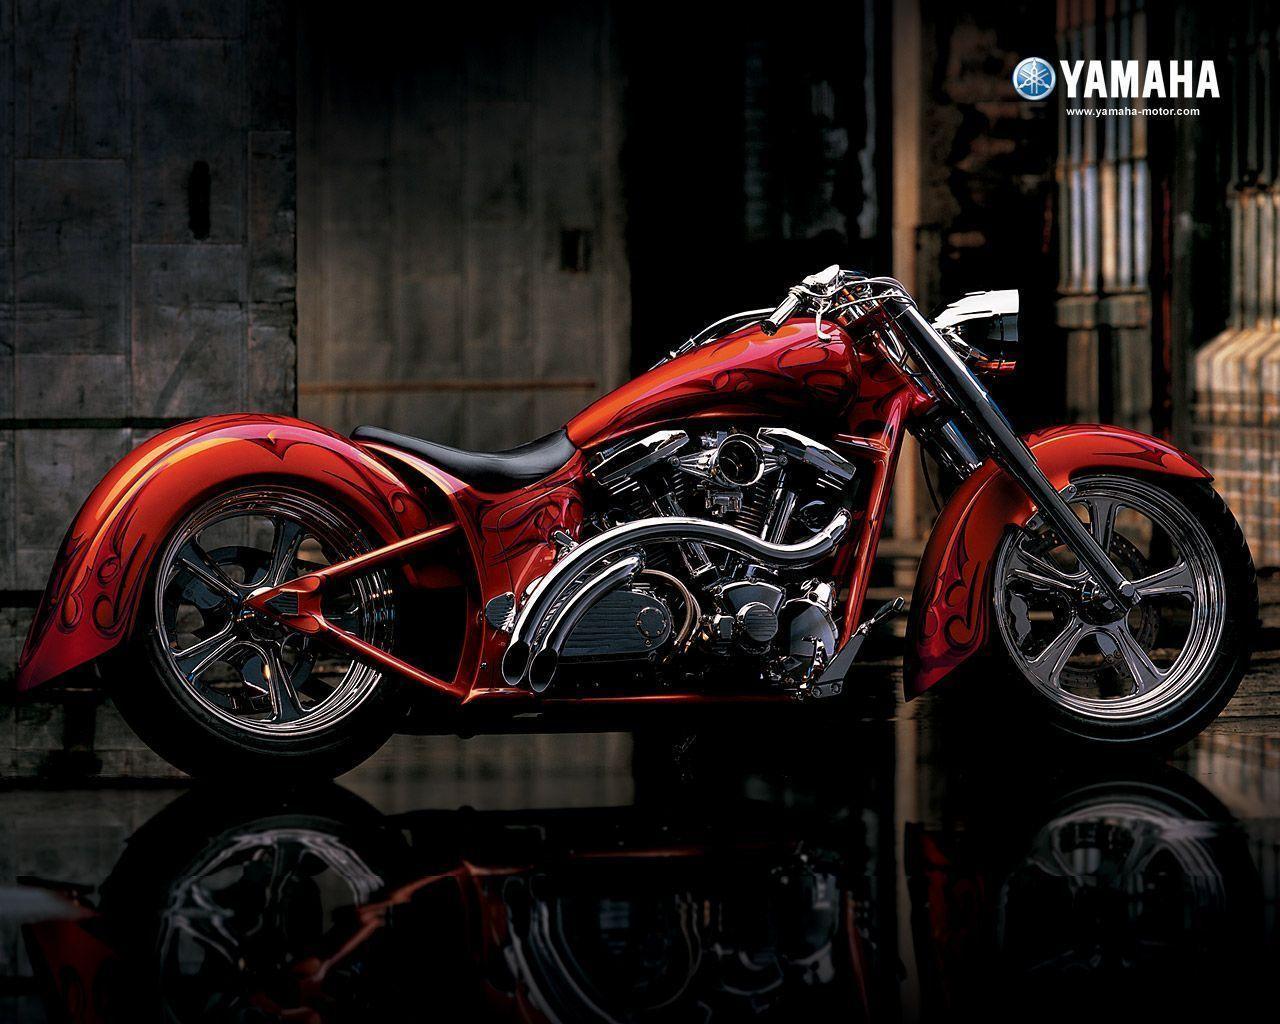 Cool Motorcycle Wallpaper 148. Collection Of Picture